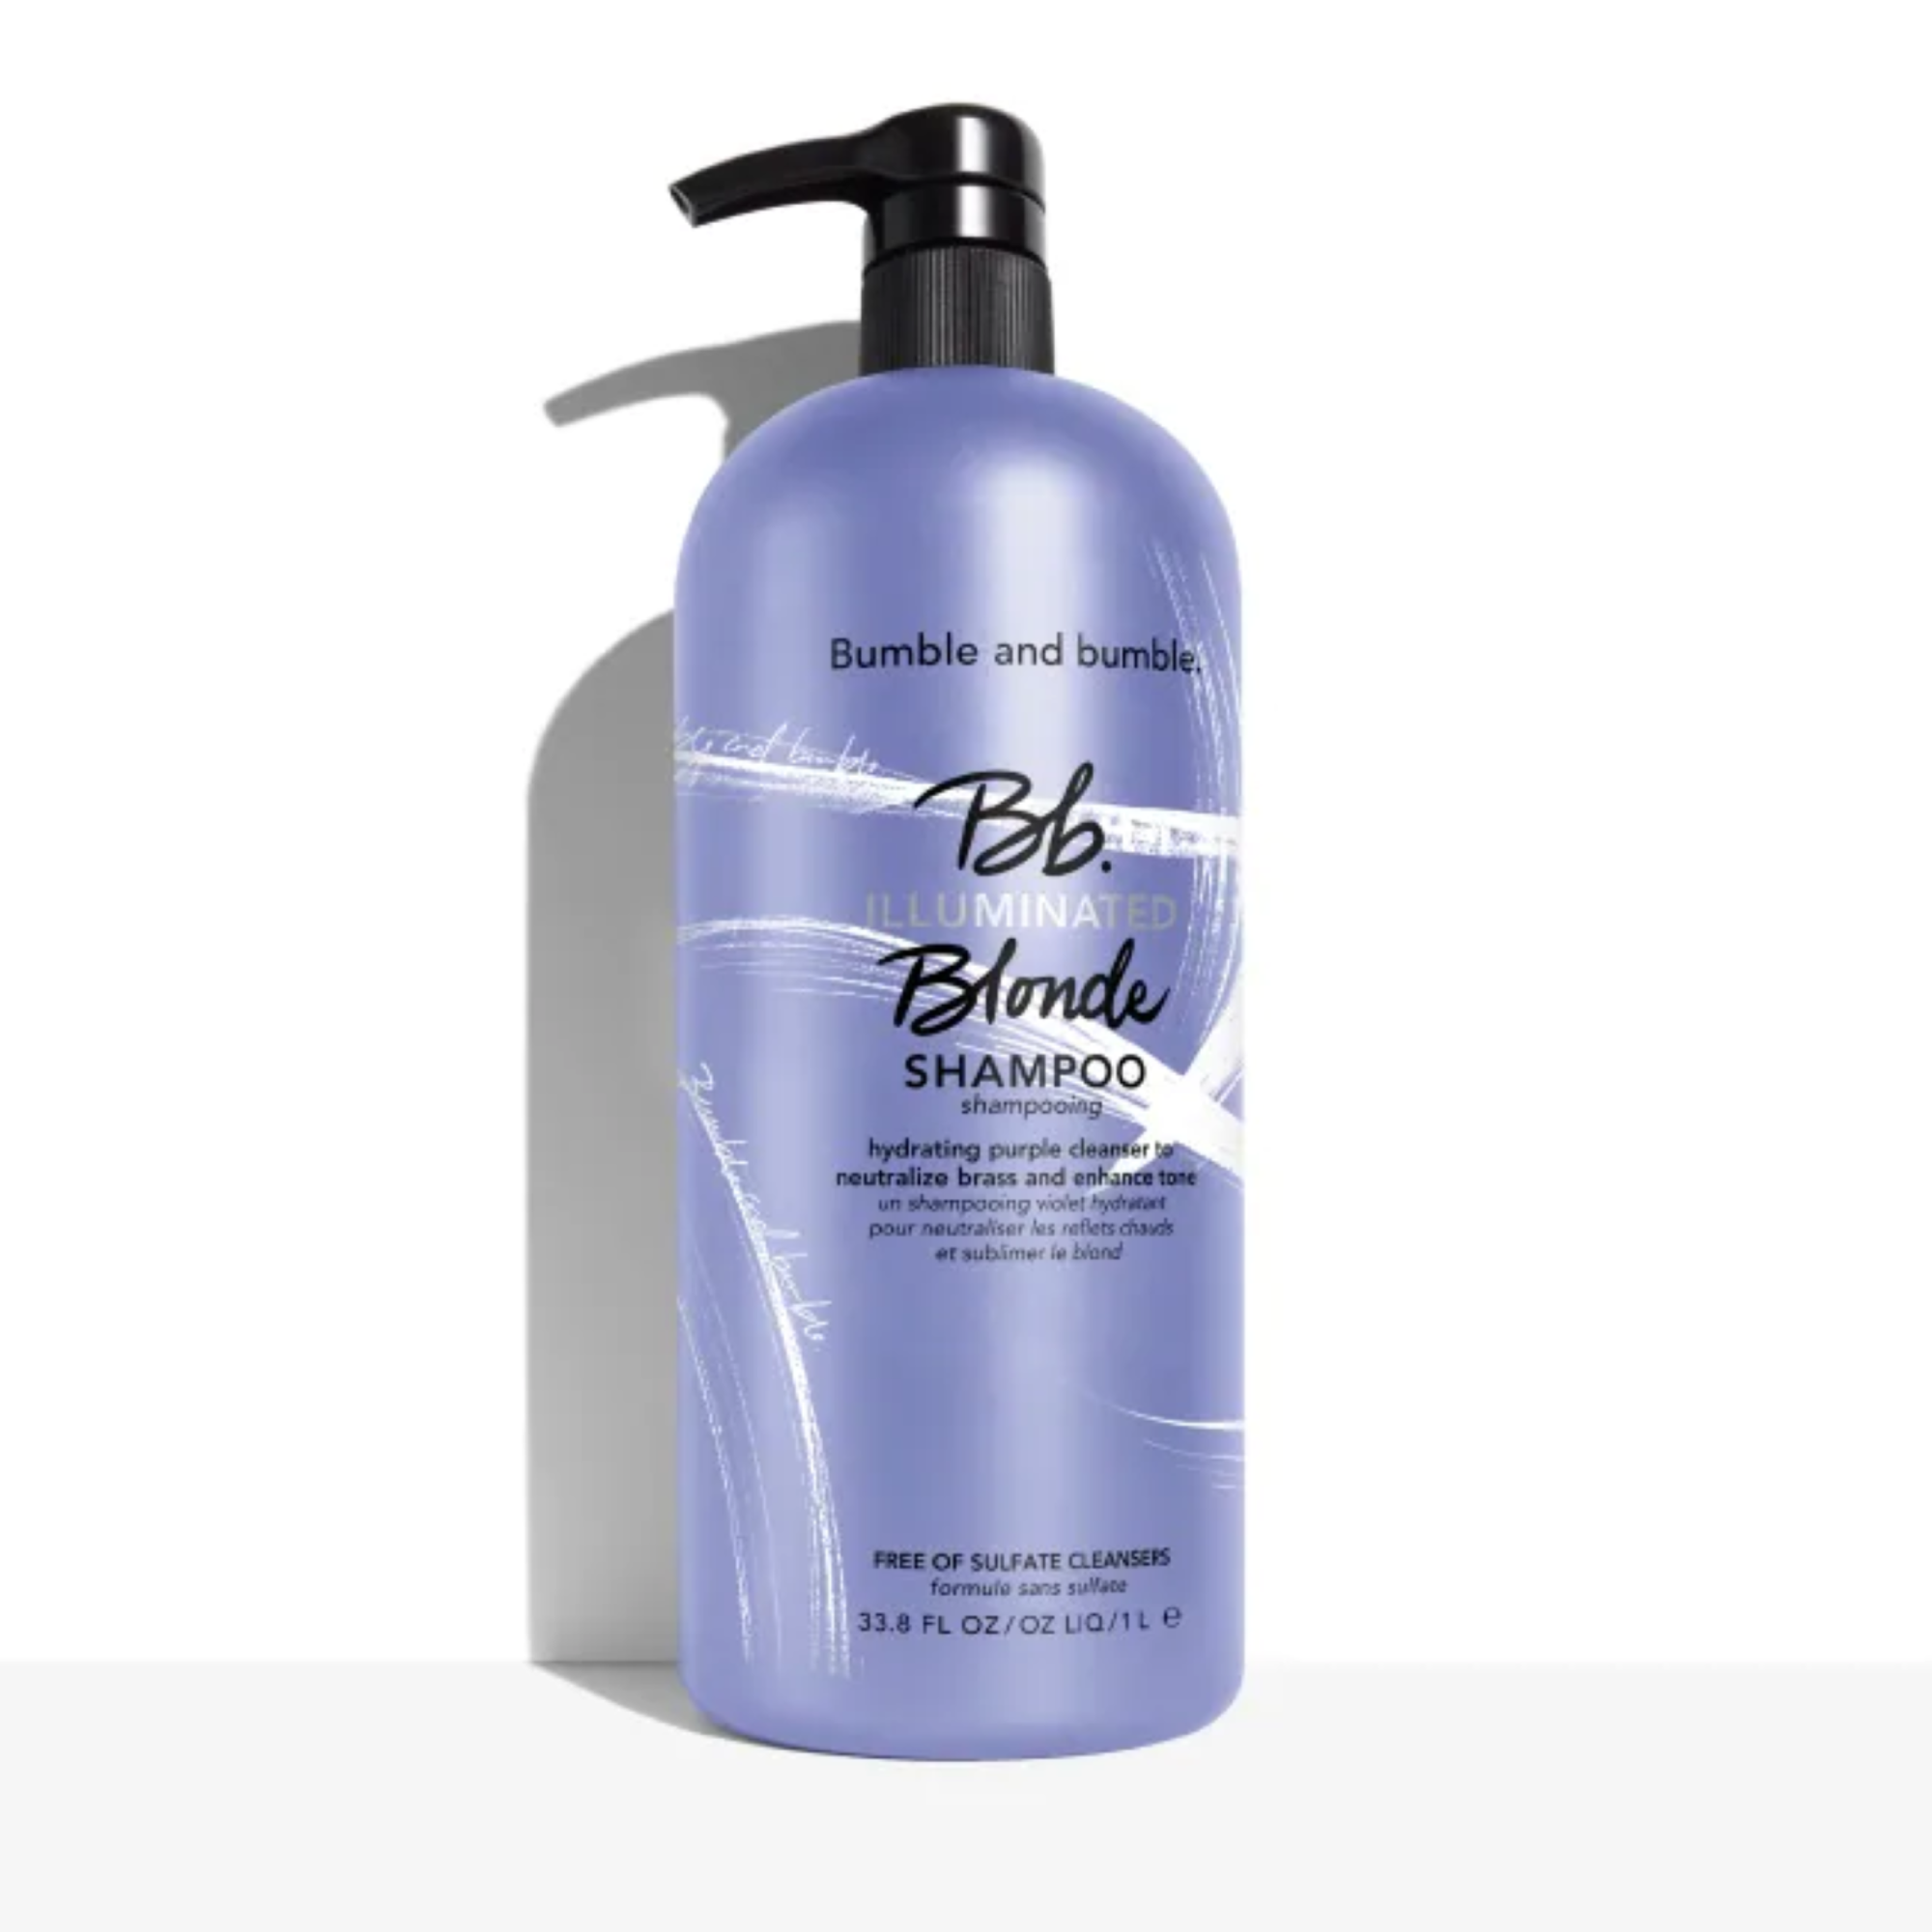 Bumble and bumble Bb.Illuminated Blonde Shampoo and Conditioner Liter Duo ($190 Value) / LITER